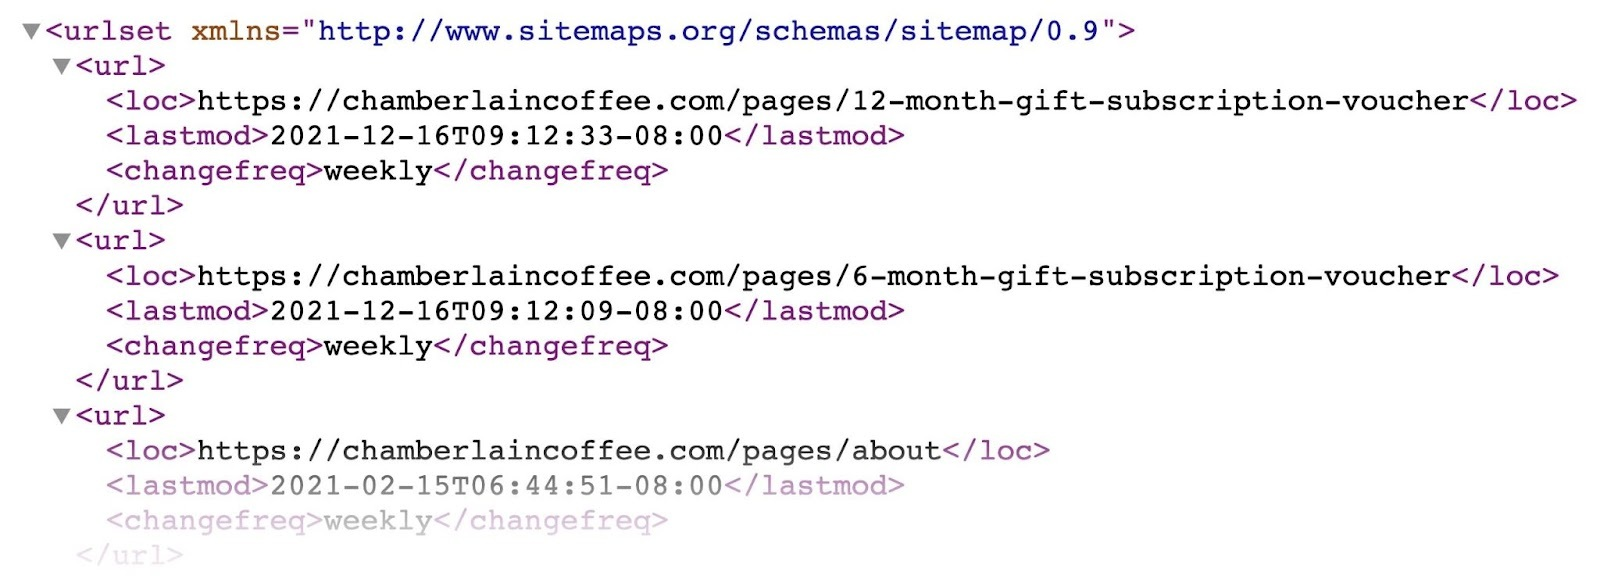 A section of an XML sitemap